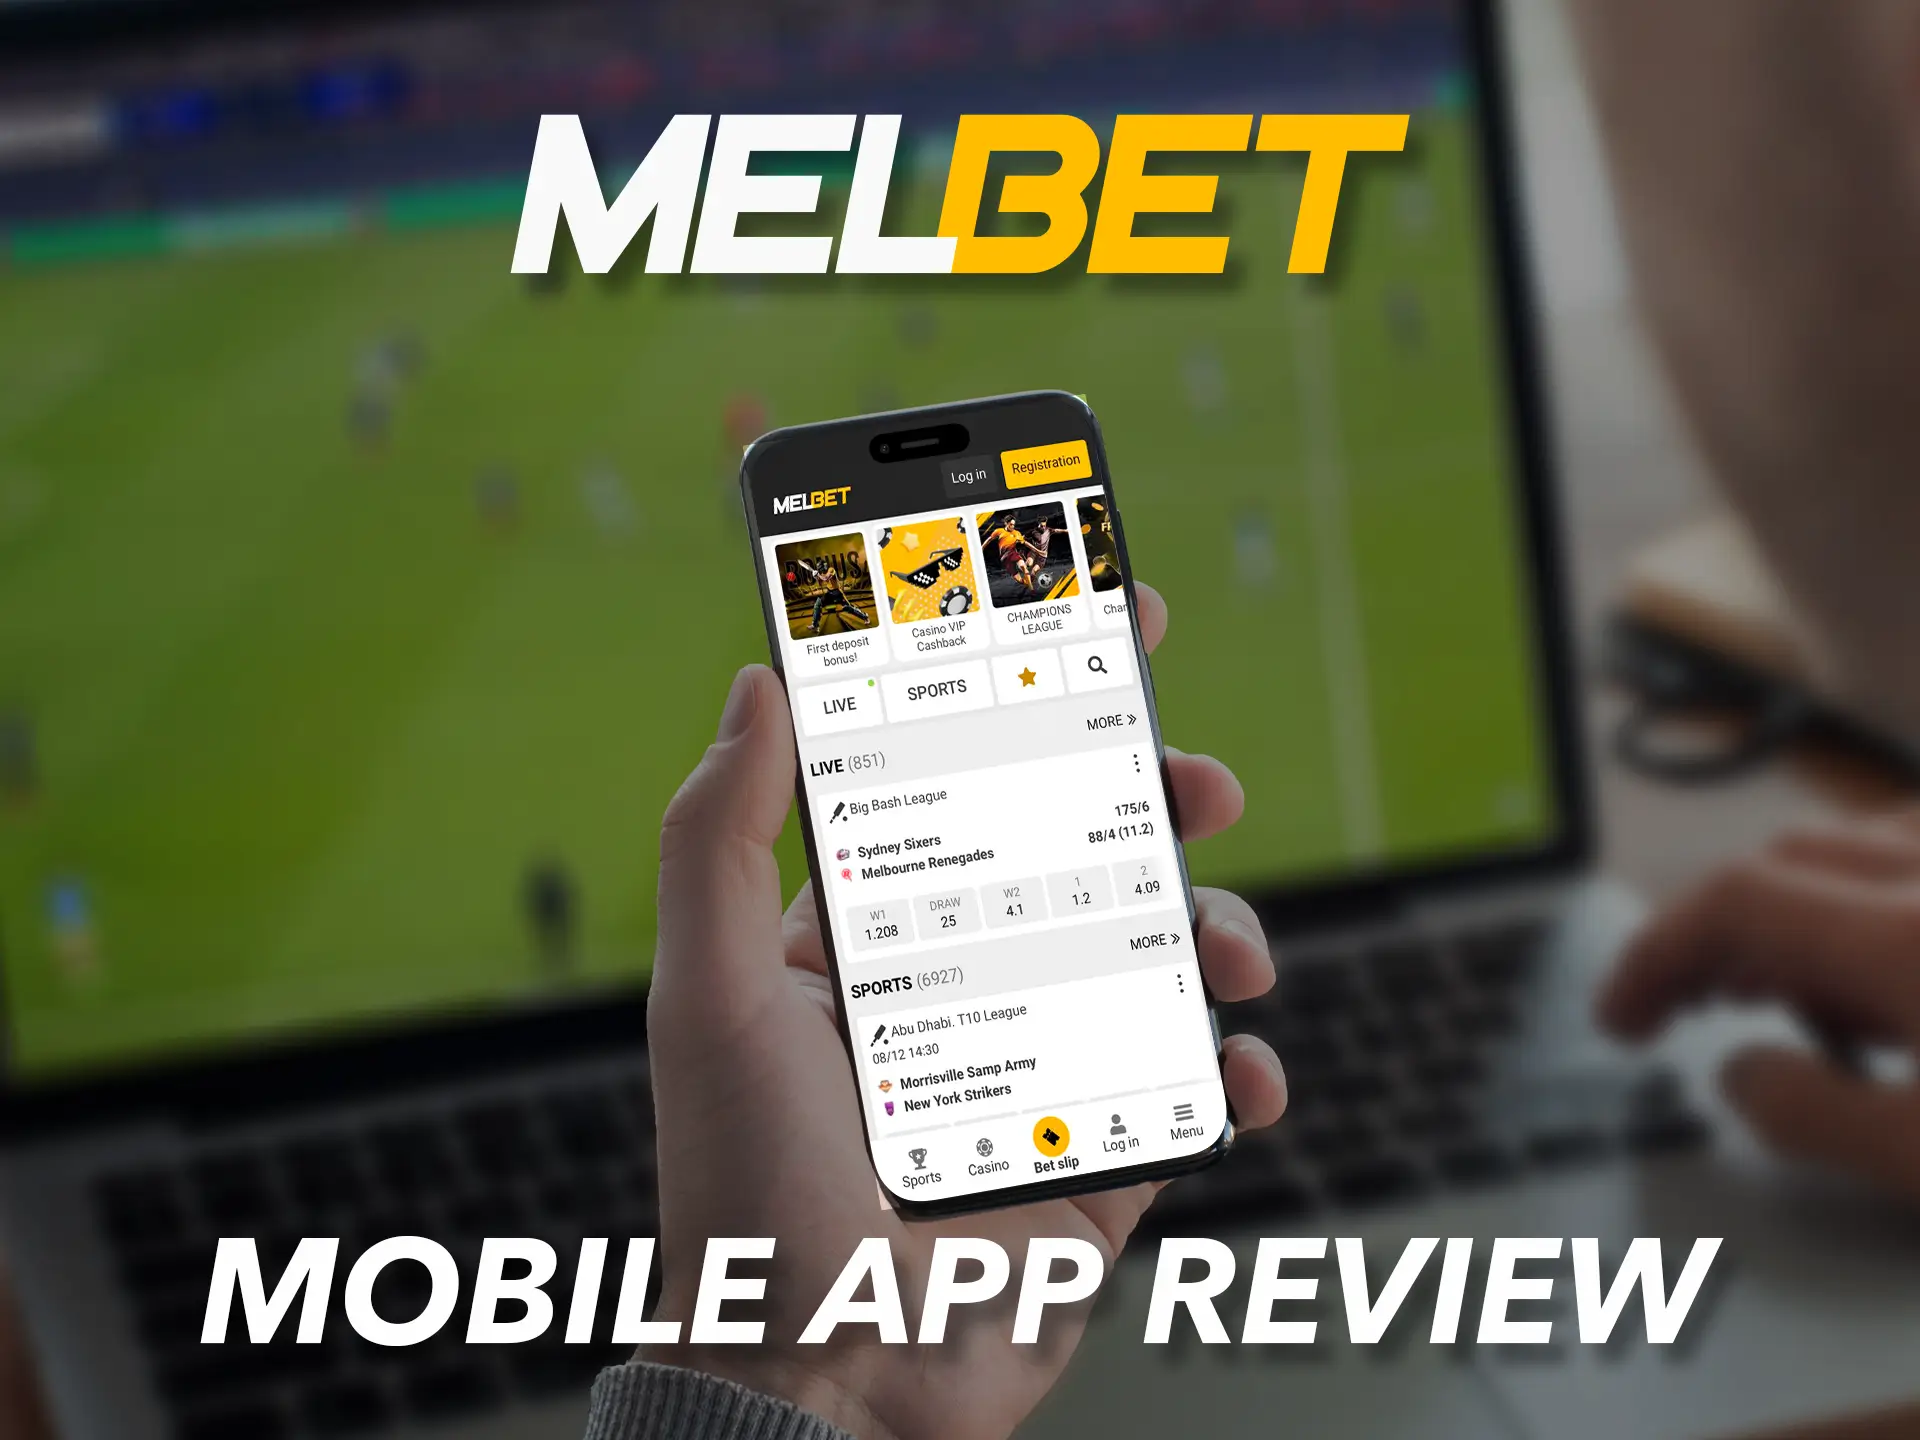 The Melbet app allows you to bet from anywhere in the world.